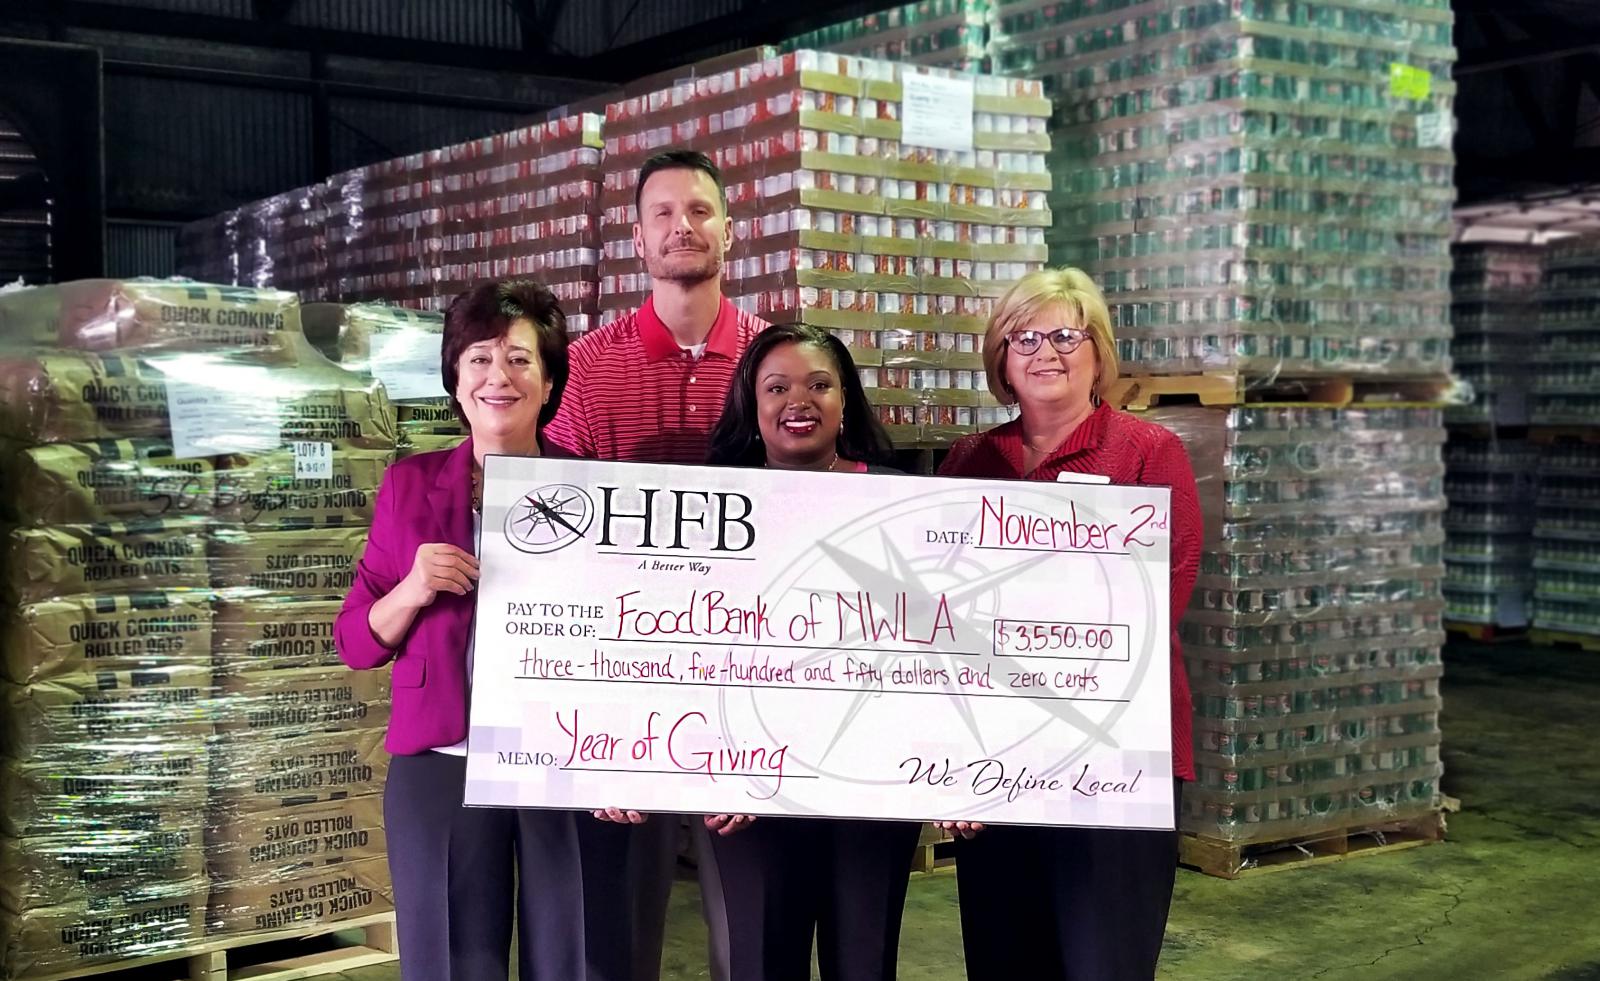 Home Federal Bank's Year of Giving 2017 Recipient, the Food Bank of Northwest Louisiana